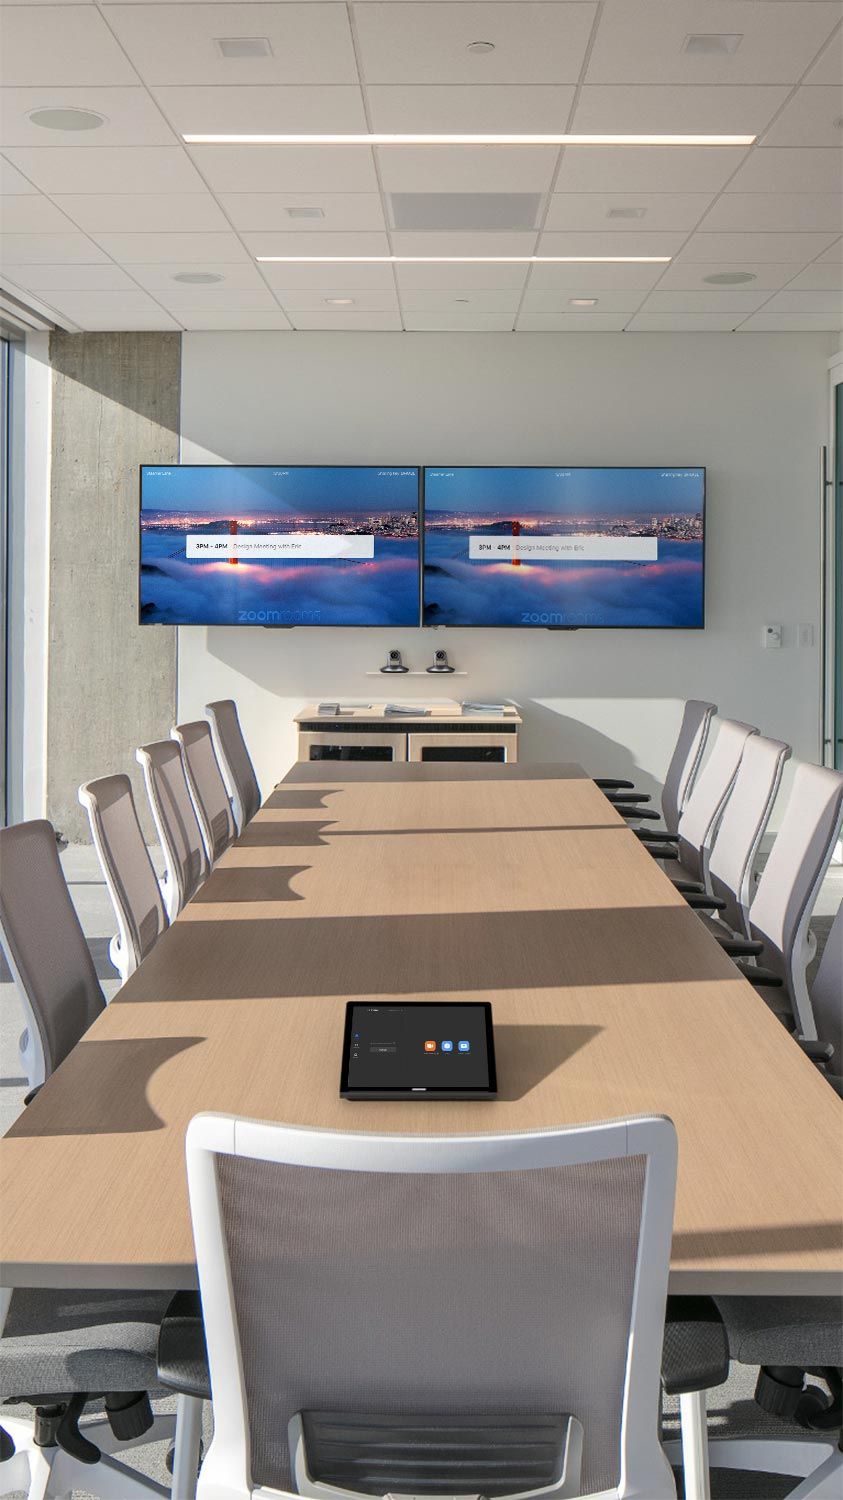 A modern conference room with a long wooden table, white office chairs, and dual screens displaying a Crestron meeting interface.